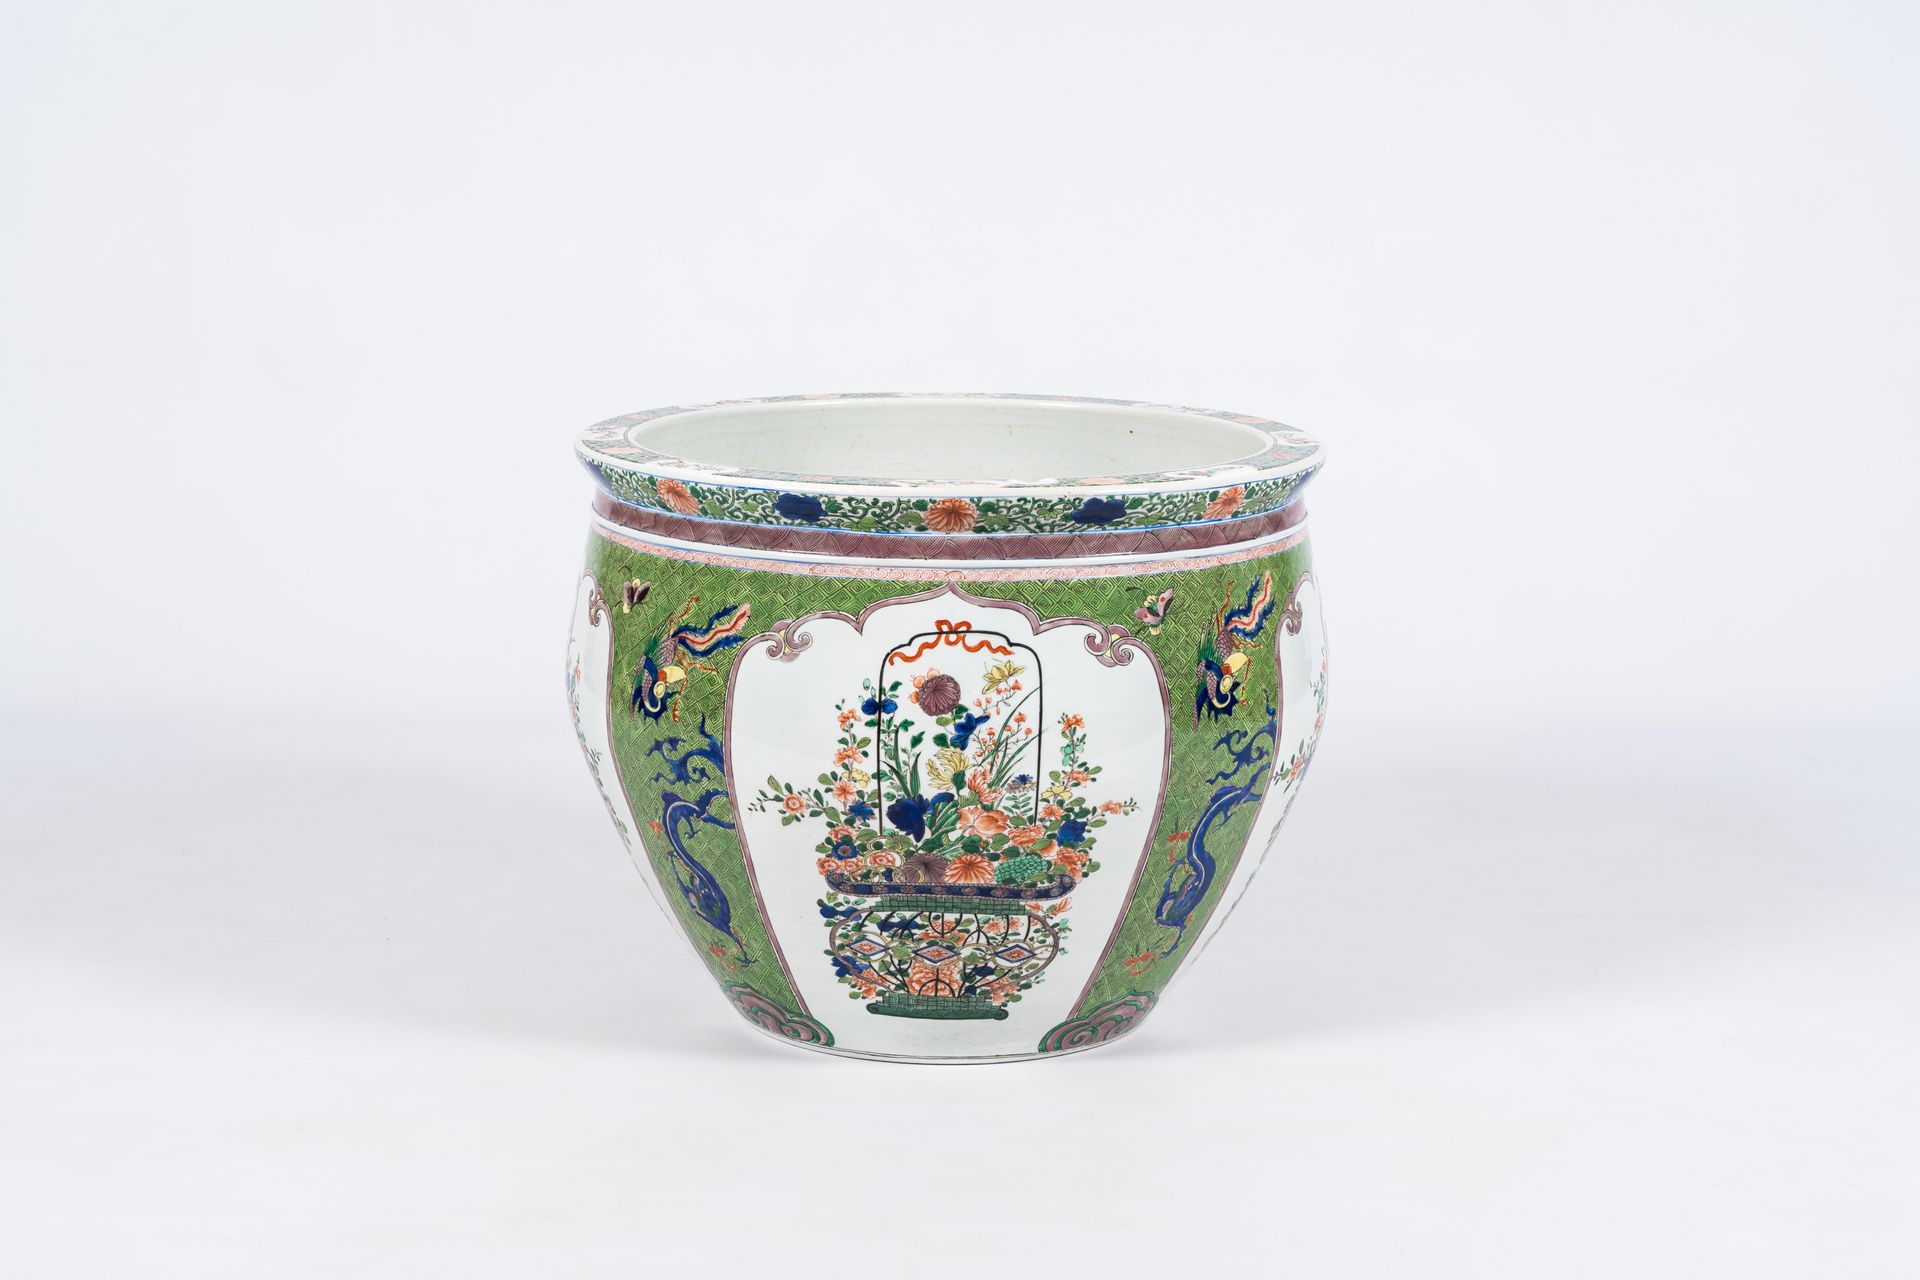 A French Samson famille verte style jardiniere with phoenixes, dragons and flowe&hellip;